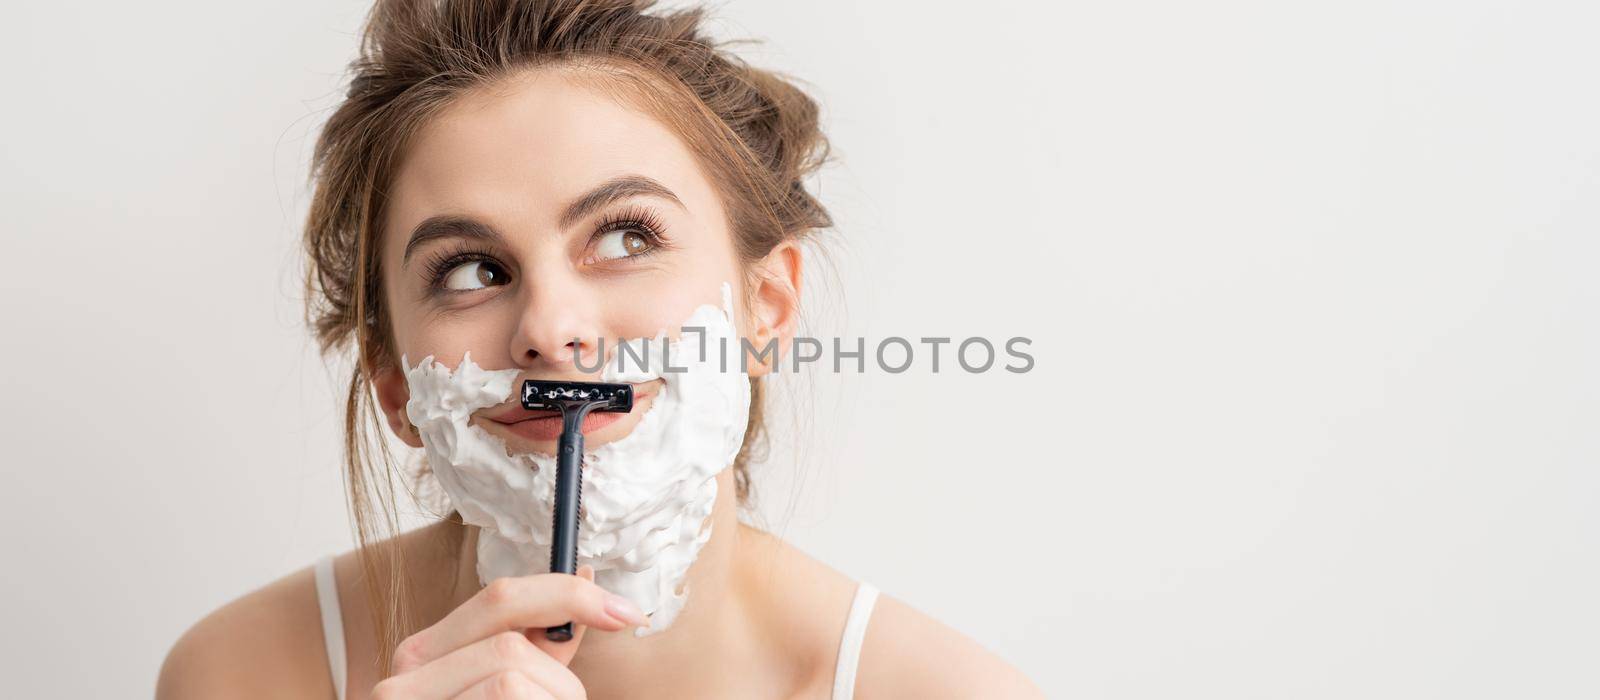 Beautiful young caucasian smiling woman shaving her face with razor looking up on white background